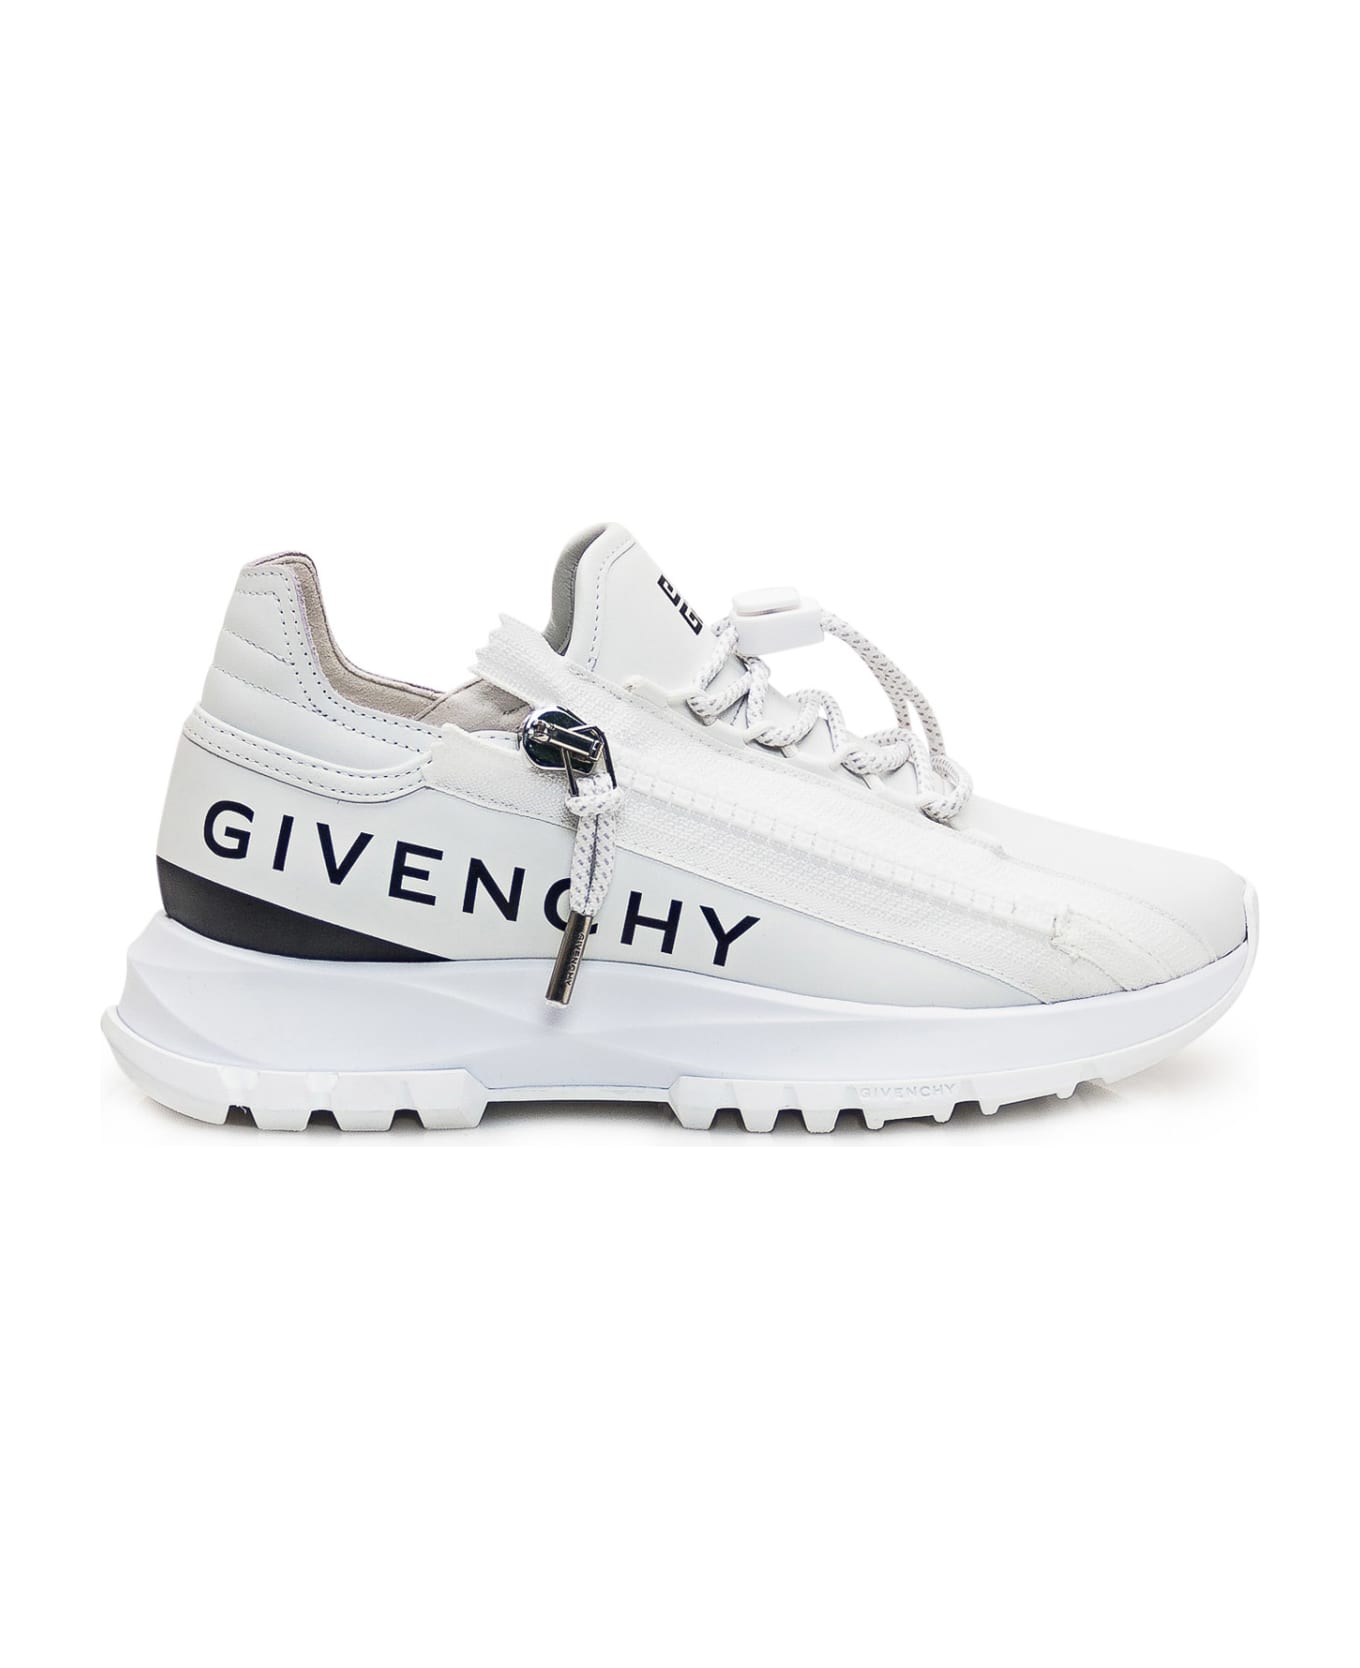 Givenchy 'spectre' Sneakers - WHITE BLACK